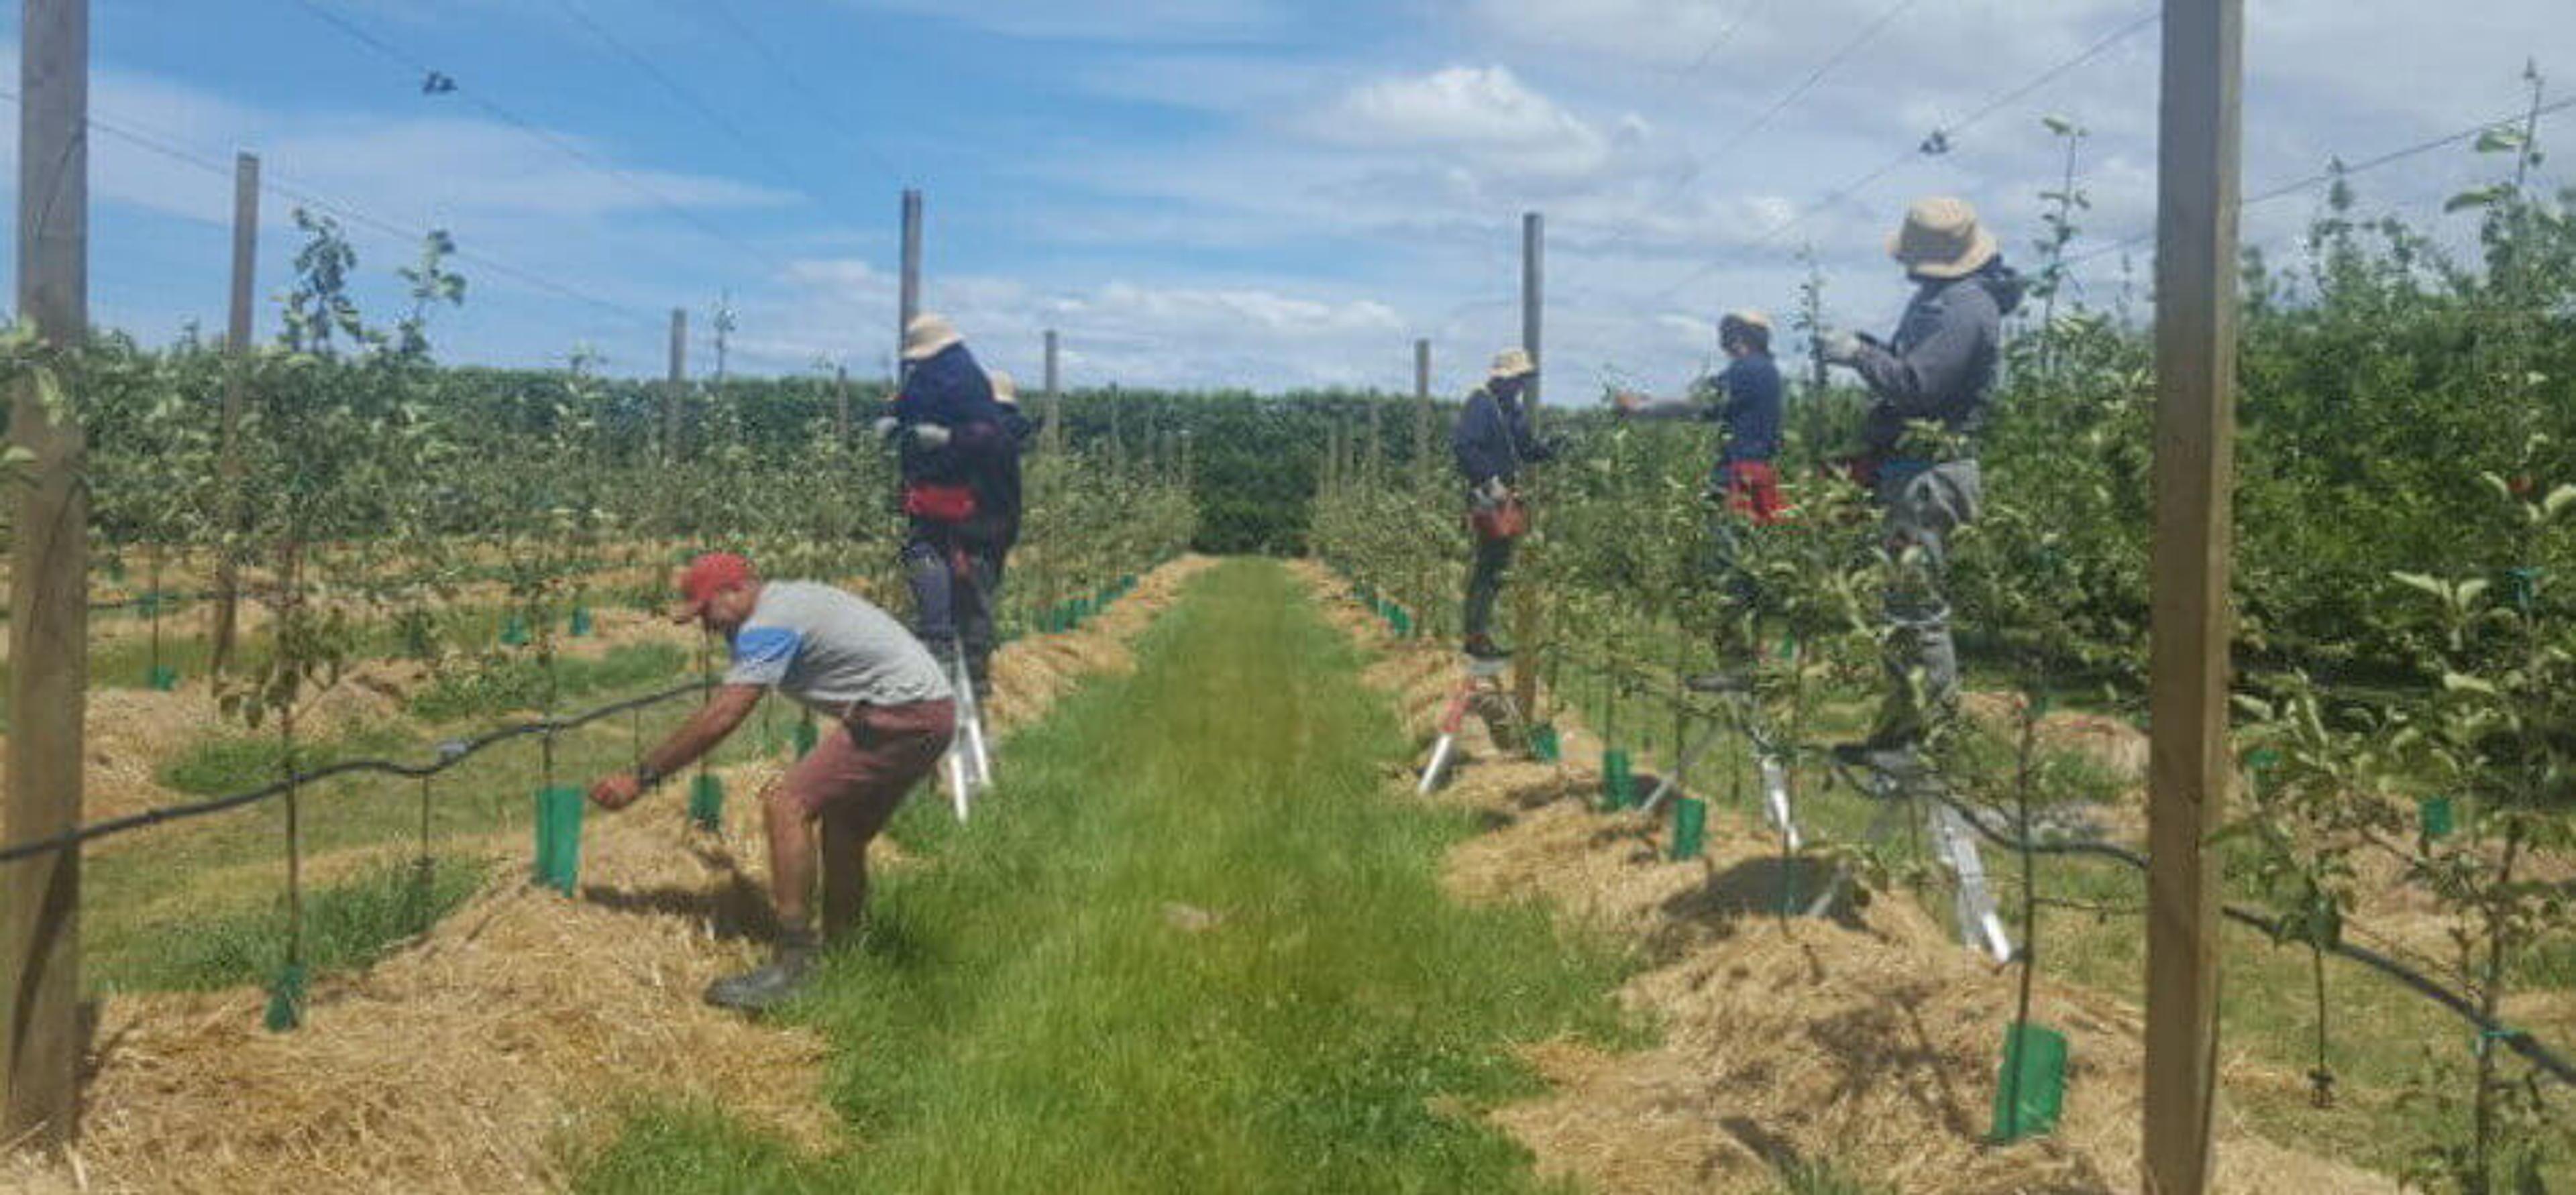 RSE workers from Samoa working in Bostock orchard, Hastings. Photo/RNZ/Anusha Bradley